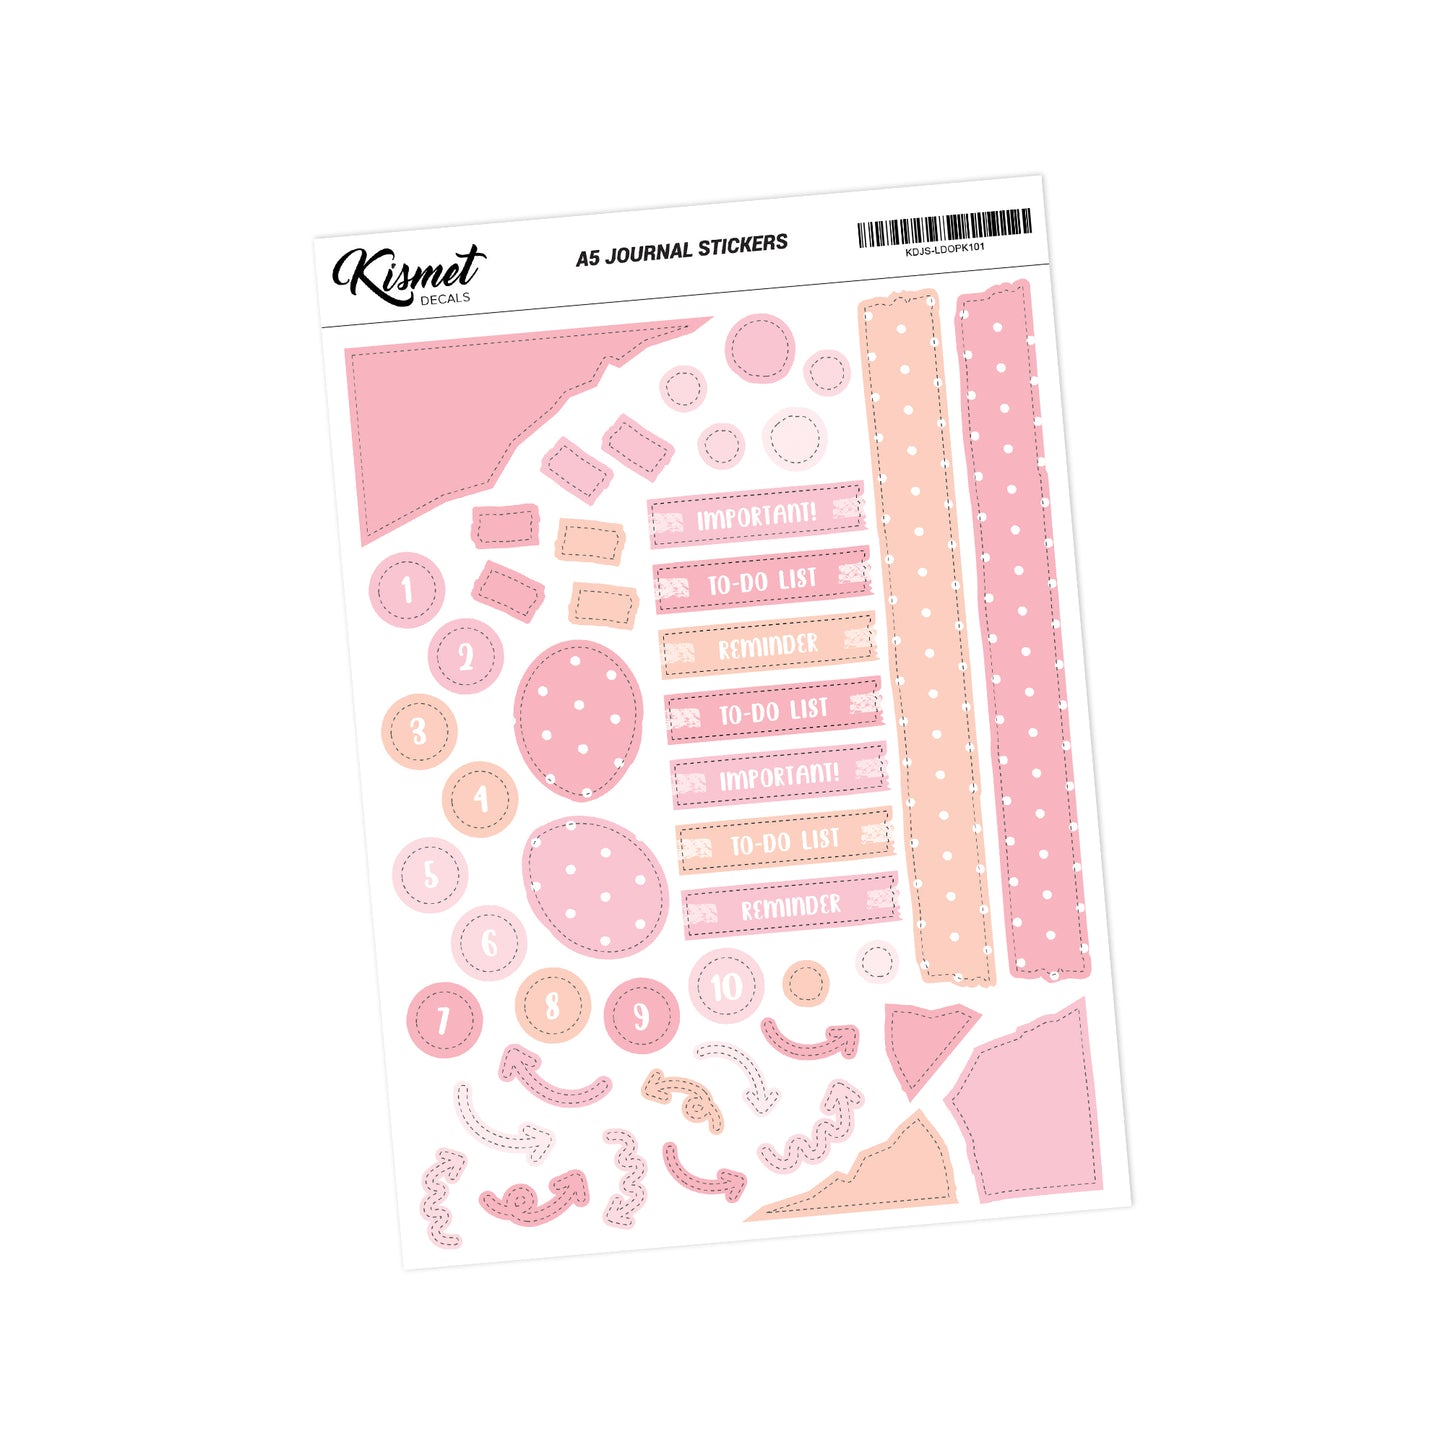 A5 Labels and Doodles Stickers - 5.3" X 8.3" - Craft Journal Snail Mail Planner Journal Diary Paper Sticker Sheet